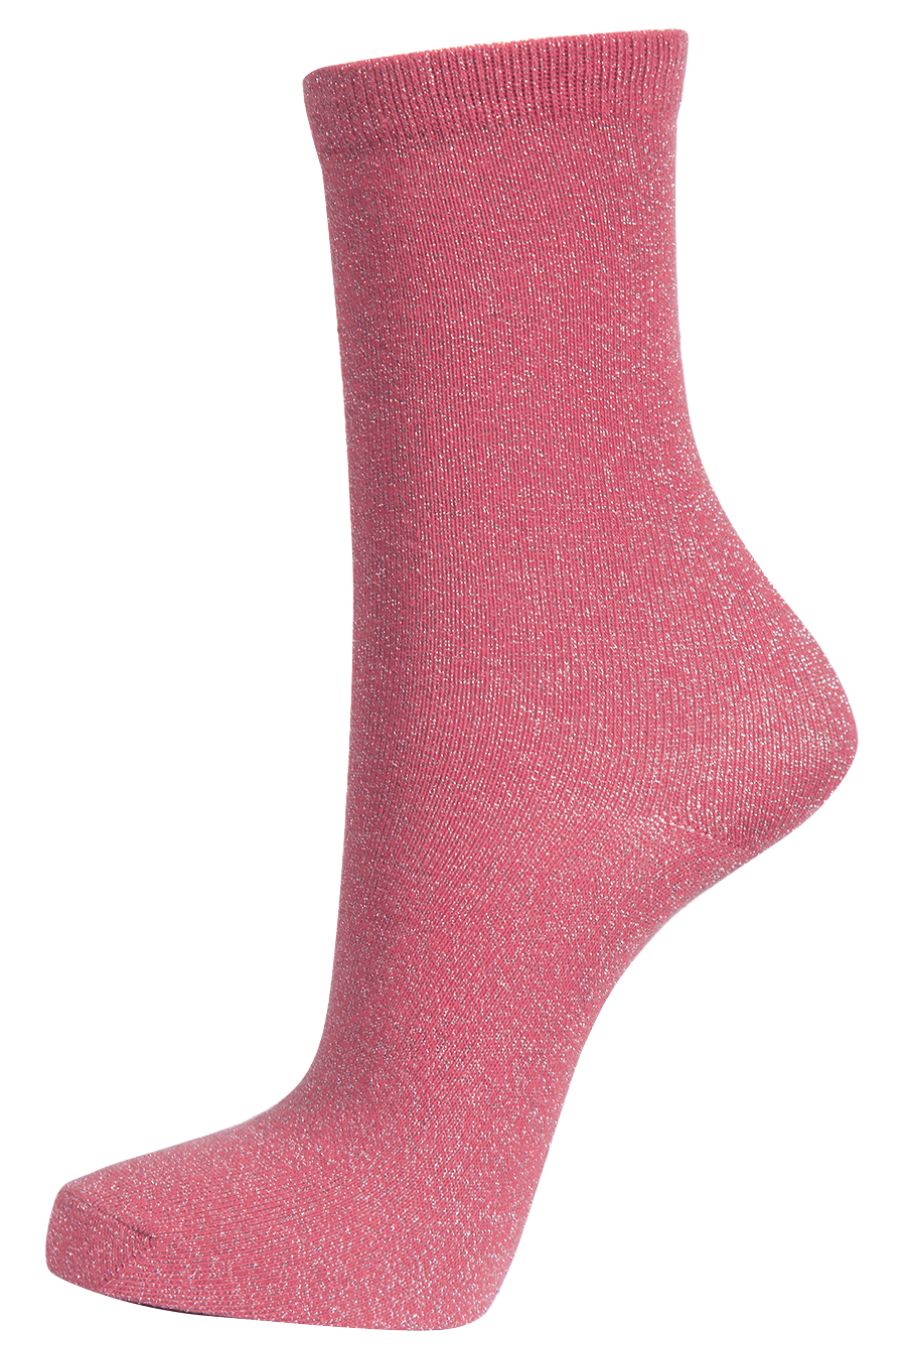 pink ankle socks with an all over silver glitter sparkle